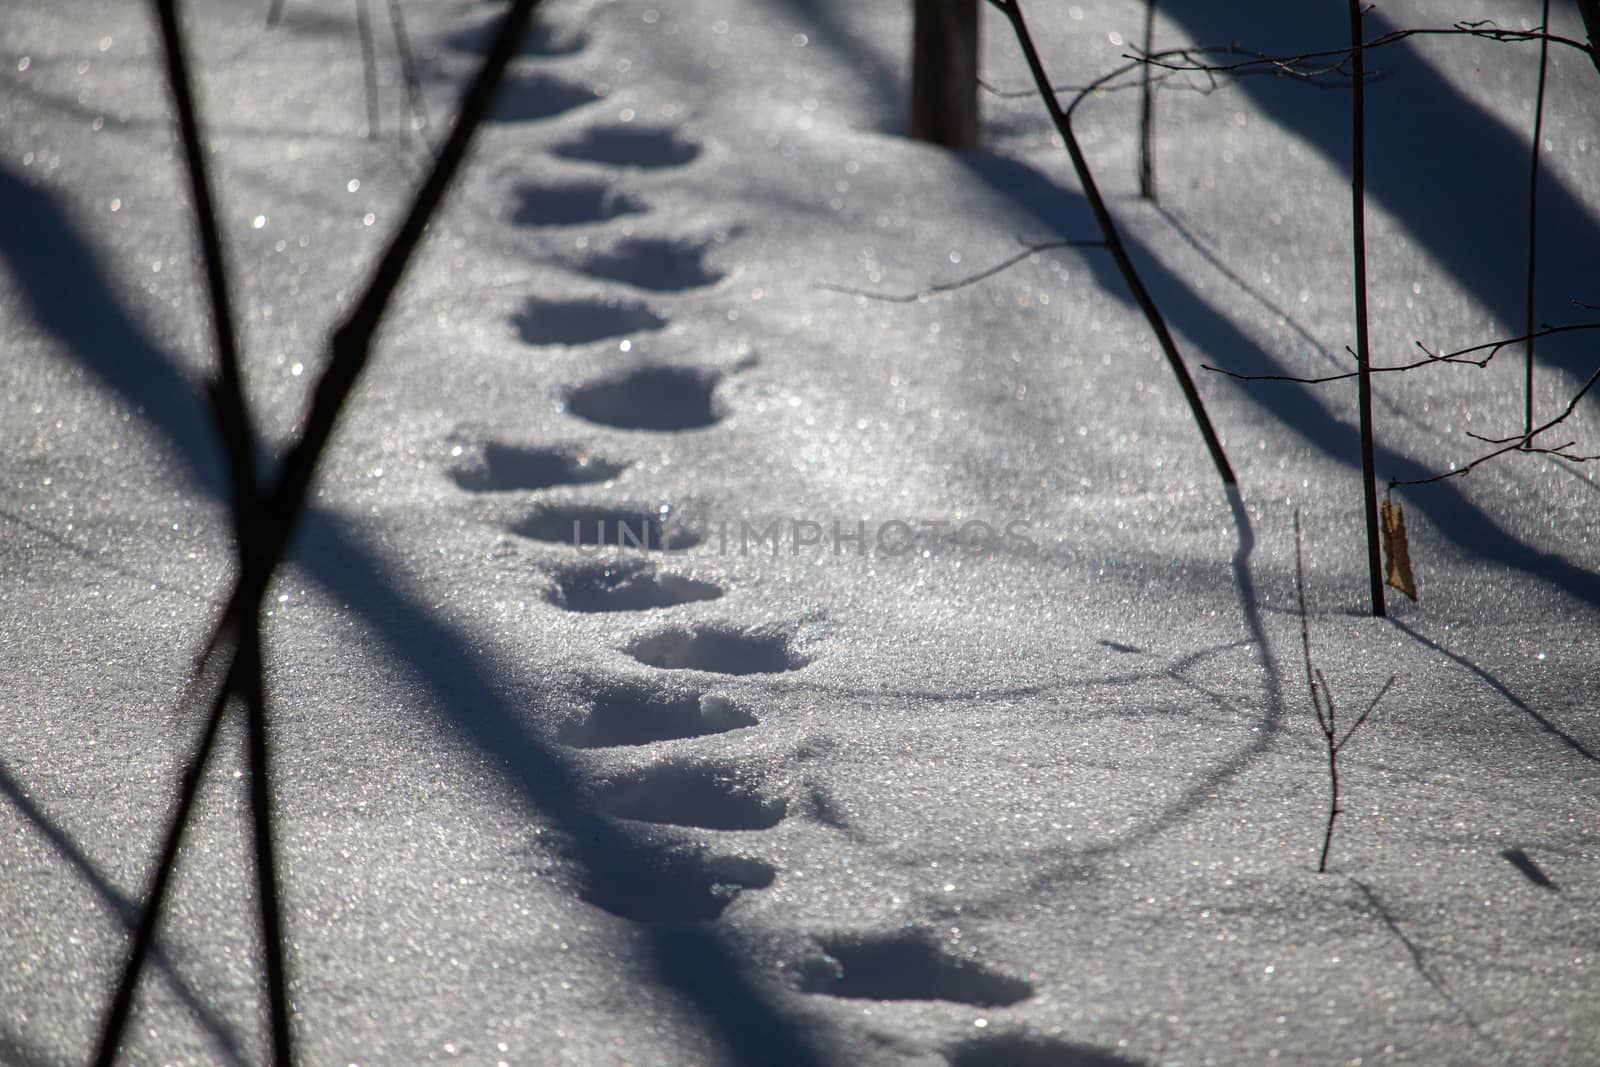 Animal tracks through deep snow in forest by colintemple